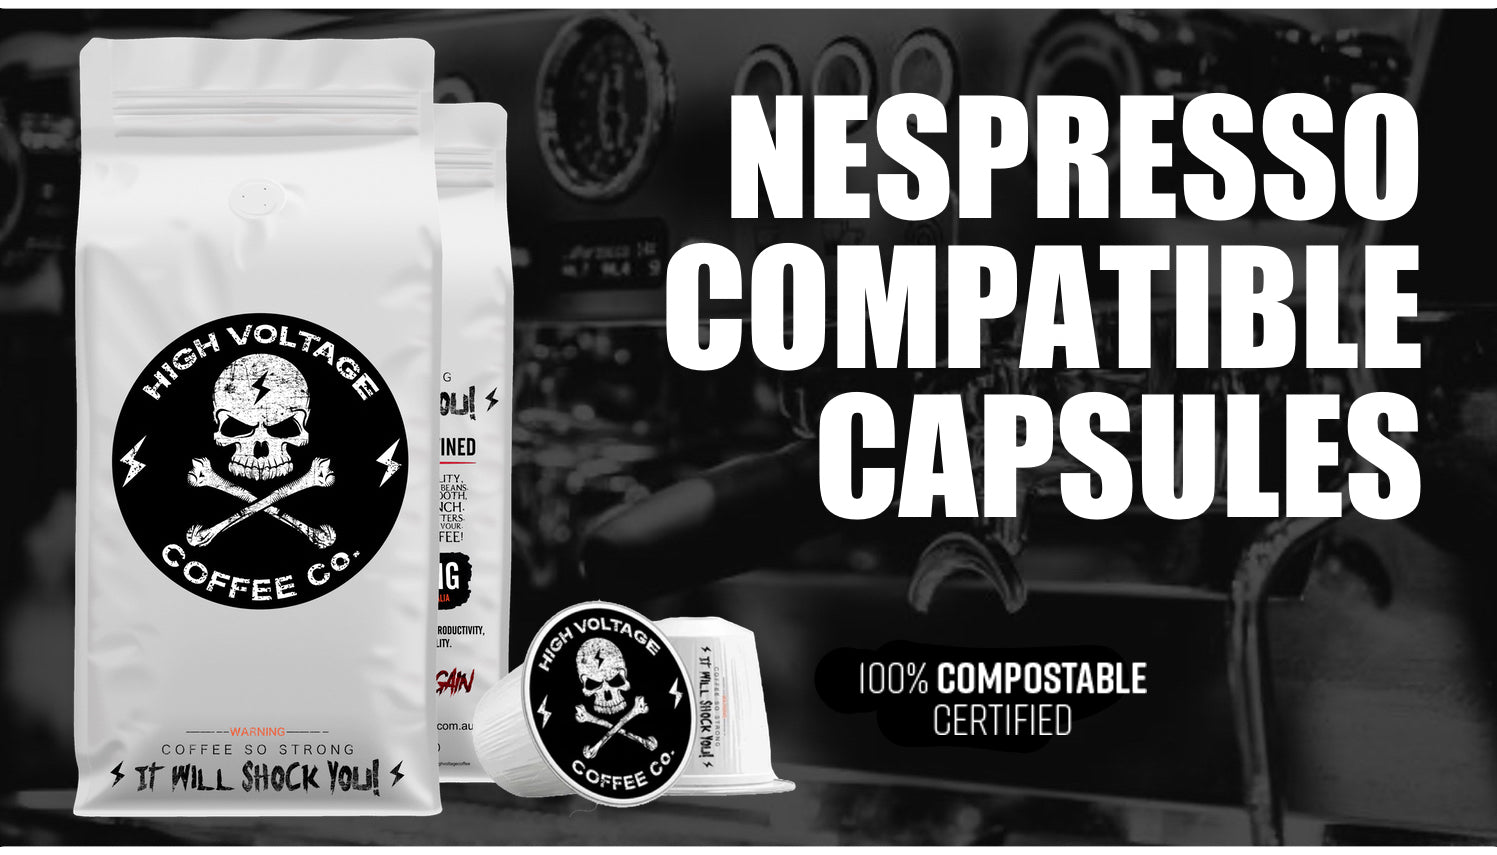 Australia's #1 Strong Coffee ☕ Delivered Fast & Fresh to your doorstep. FREE Shipping on orders $75 and over. Australian Nespresso compatible coffee capsules with High Voltage Coffee Co. 100% compostable certification. Strongest nespresso coffee capsules pods. Australian Nespresso